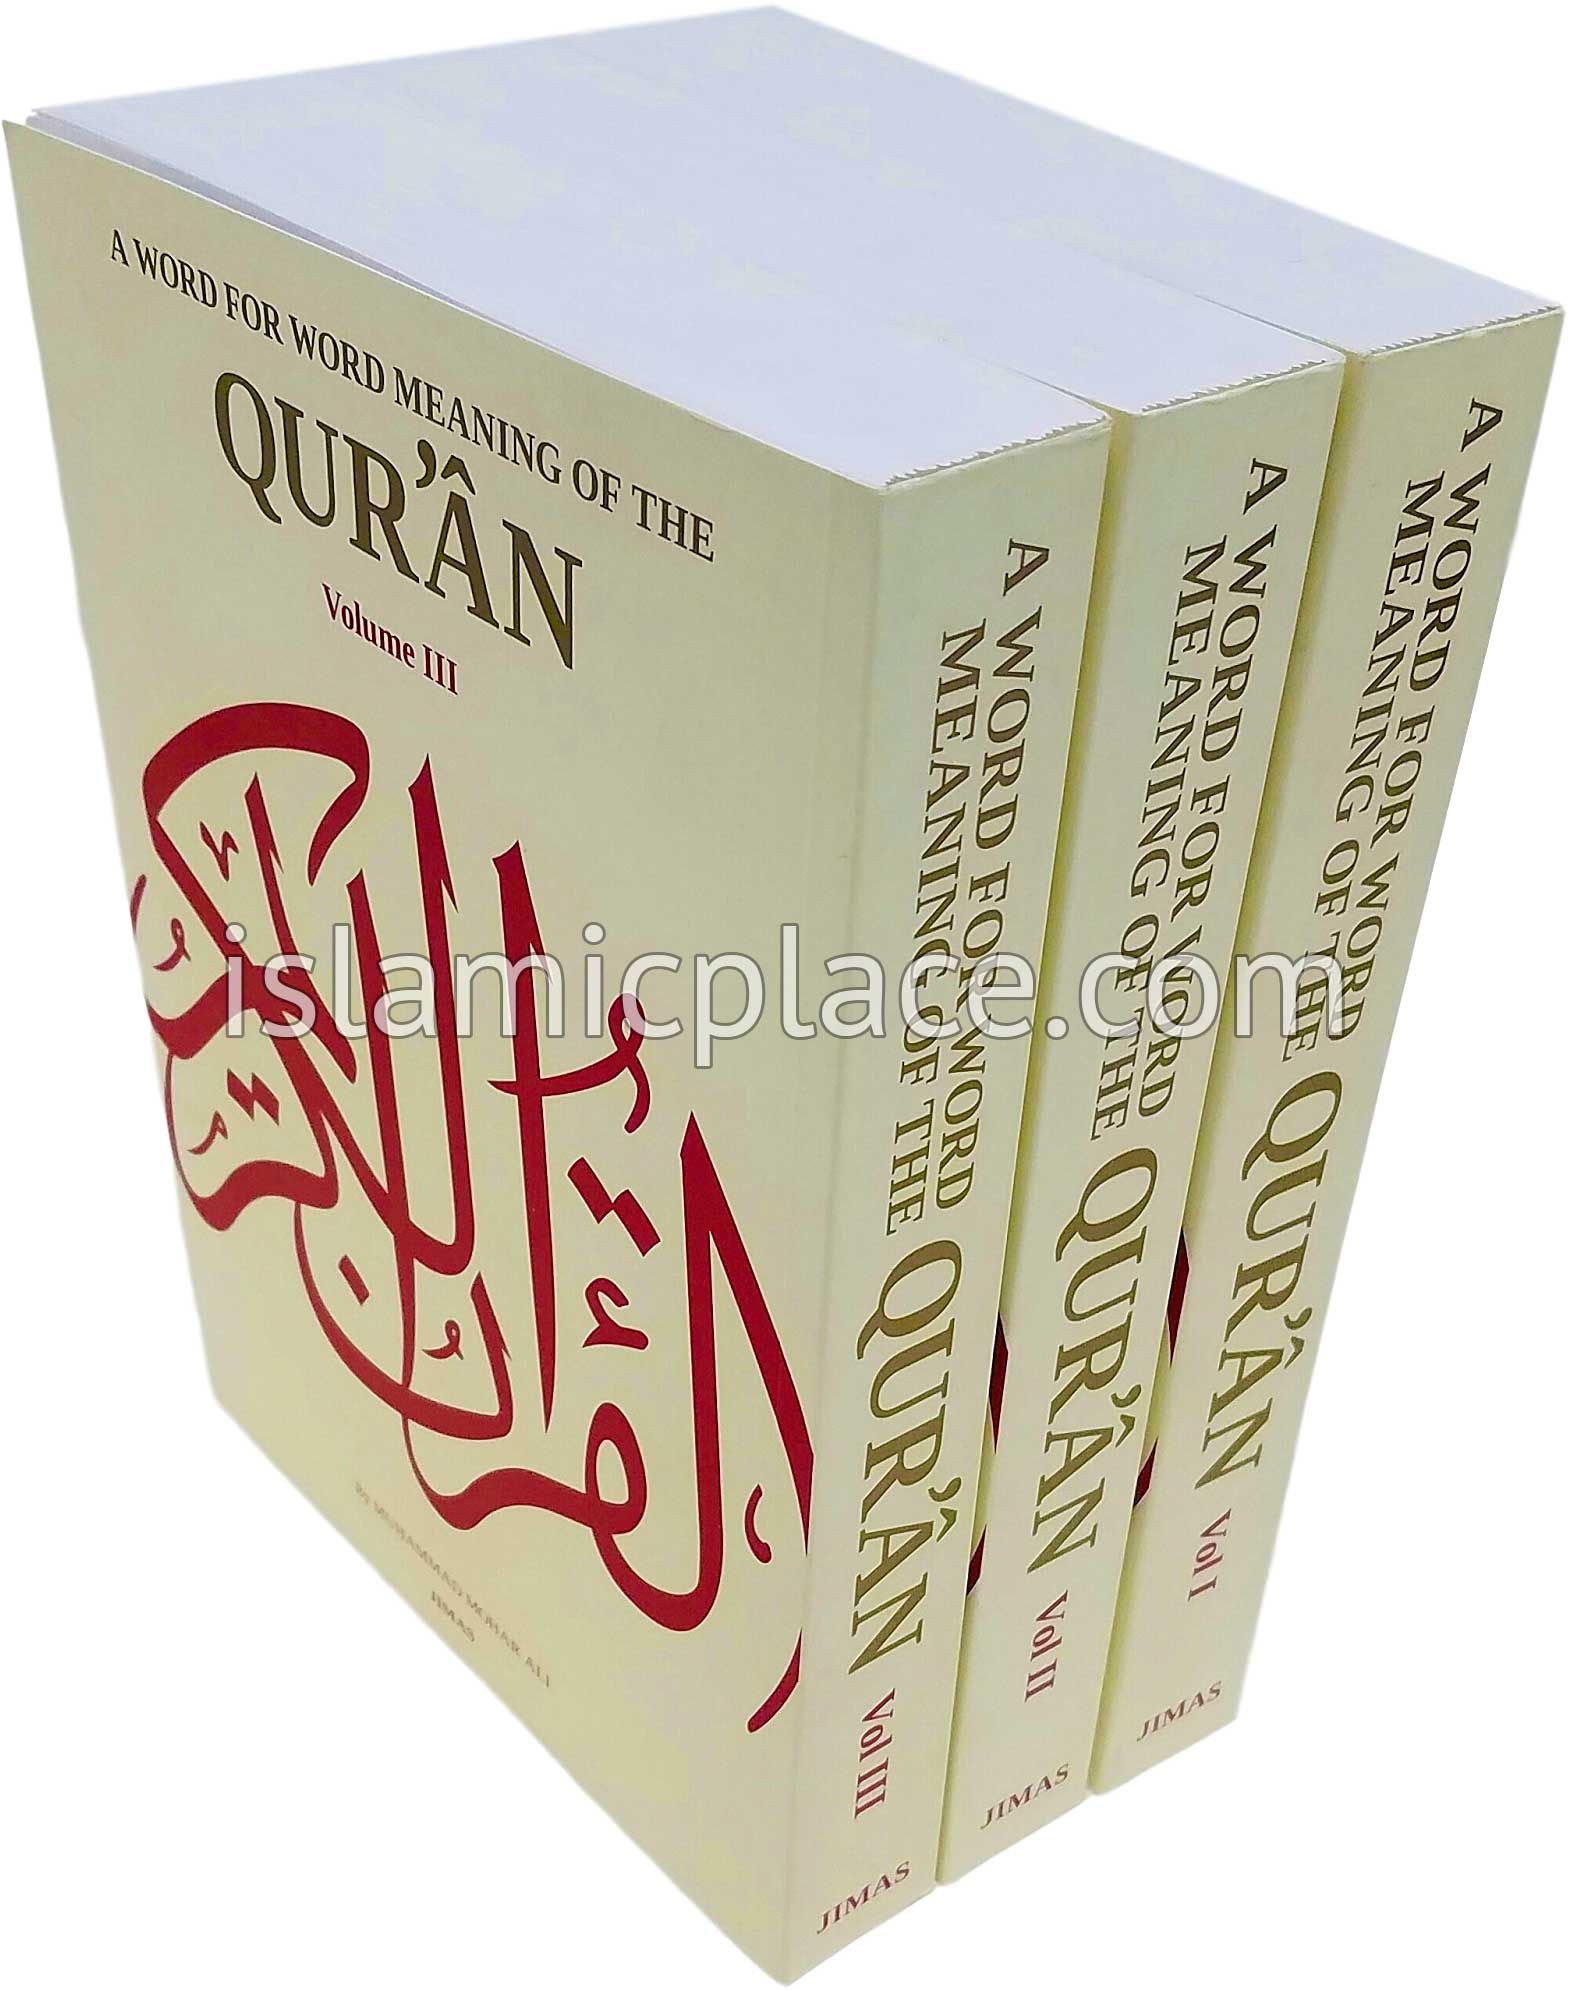 [3 vol set] A Word for Word Meaning of the Qur'an by Mohar Ali